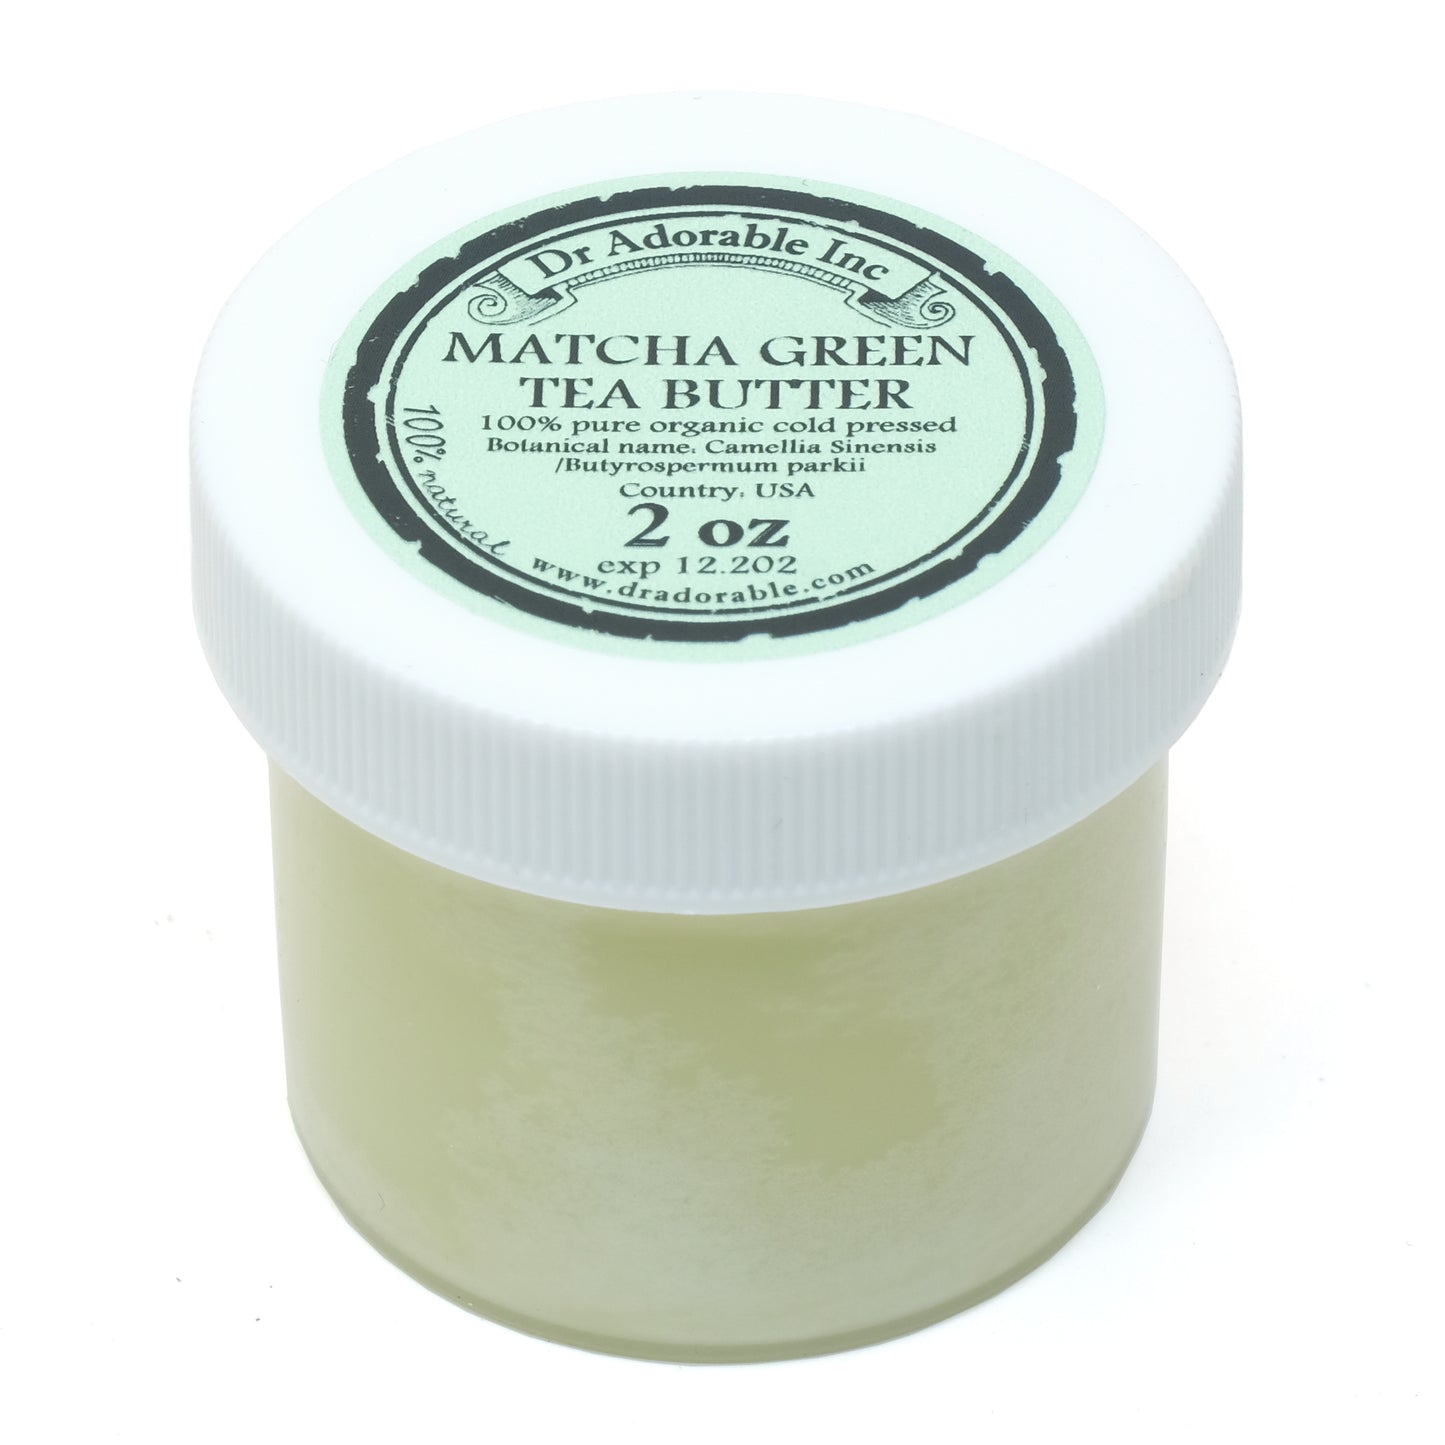 Matcha Green Tea Butter - Pure Natural Organic Cold Pressed